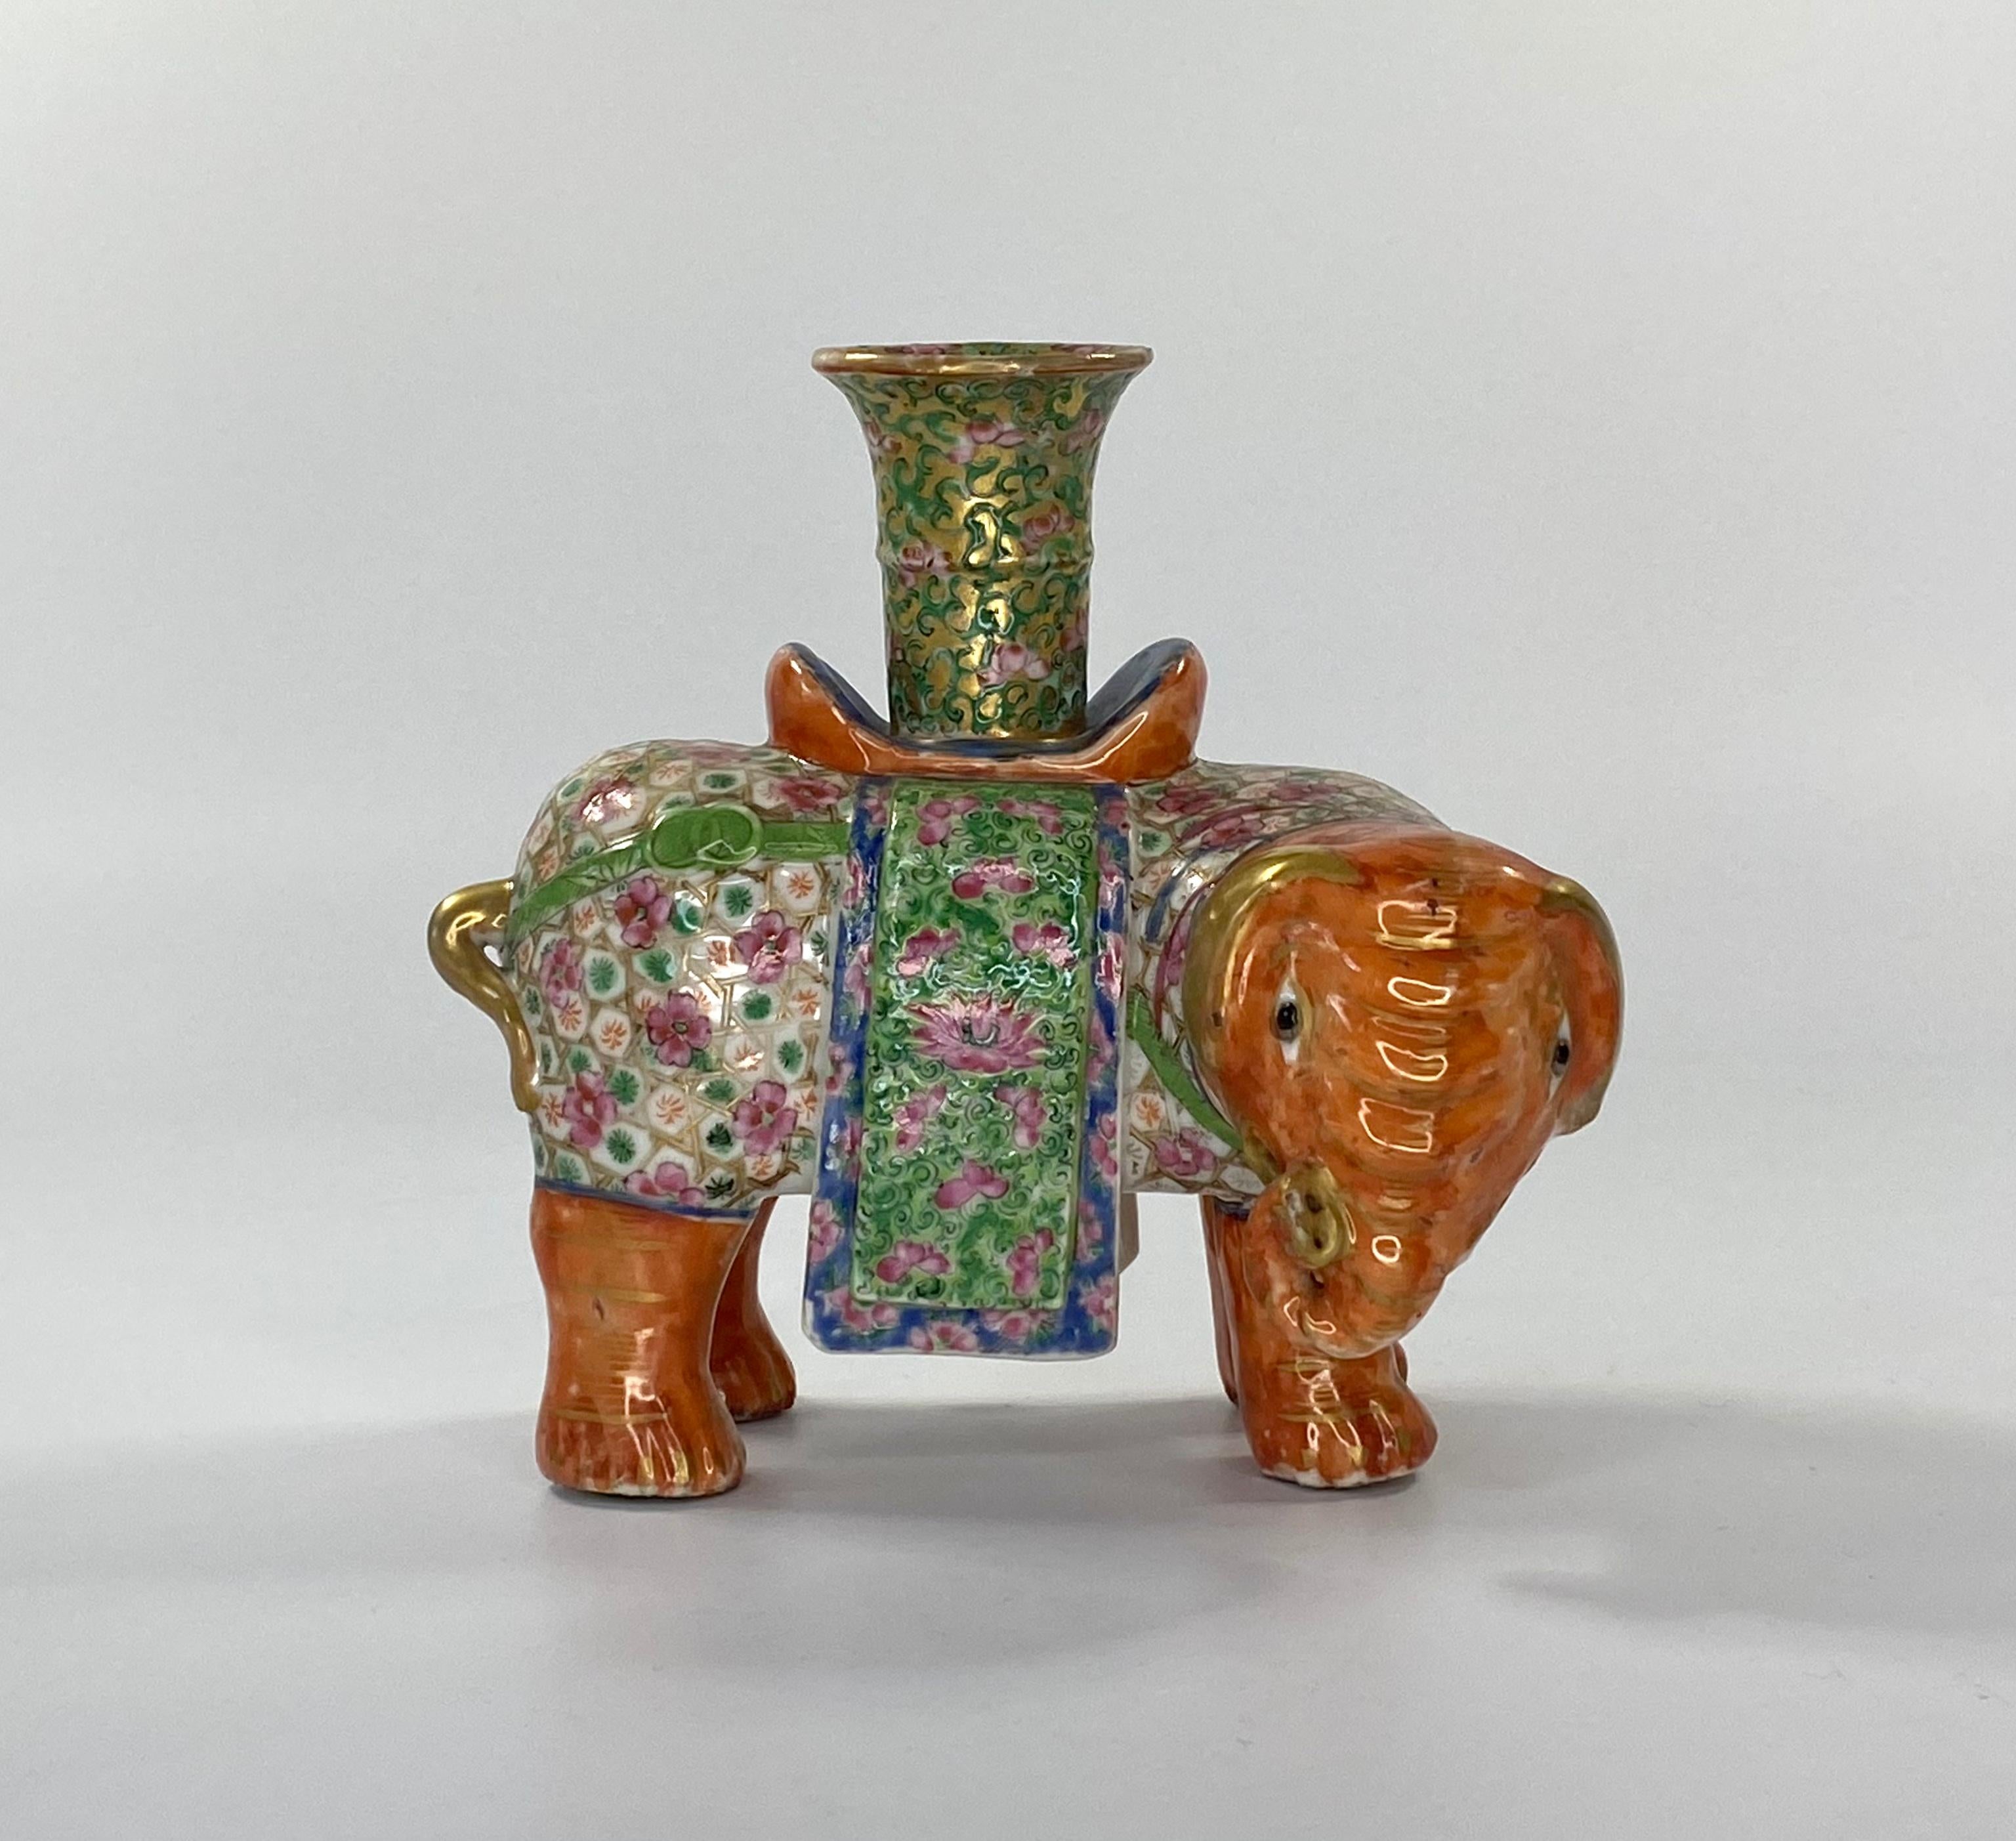 A fine pair of Chinese porcelain elephant joss stick holders, circa 1850. Both caparisoned elephants having iron red bodies, highlighted in gilt. The drapes well decorated in famille rose enamels with flowering plants weaving through a gilt trellis.